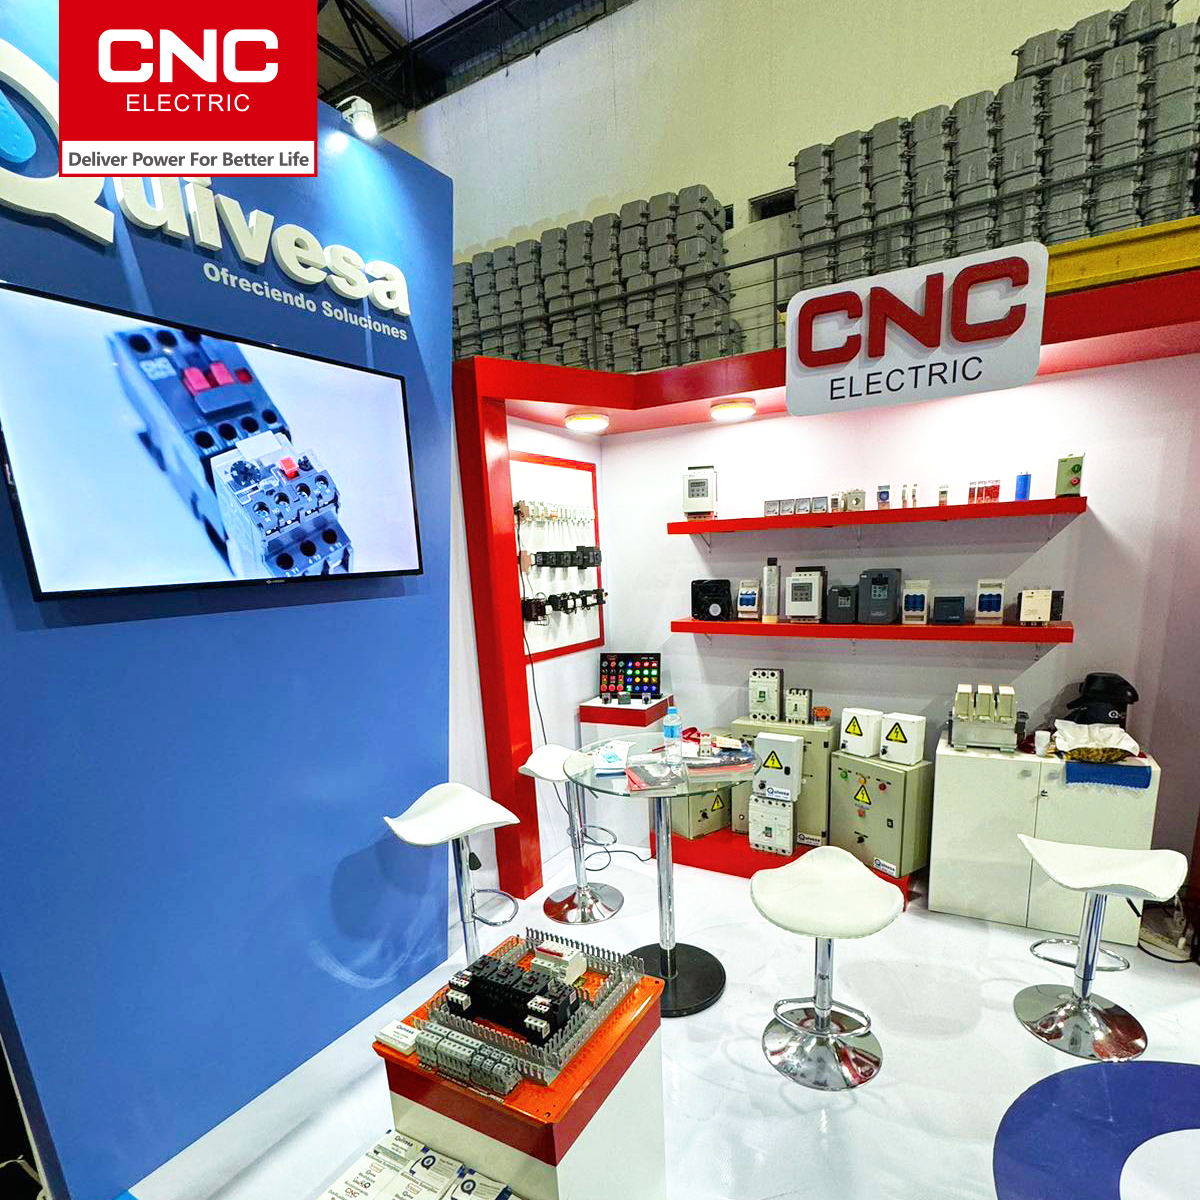 CNC | CNC Electric in the exhibition in Paraguay